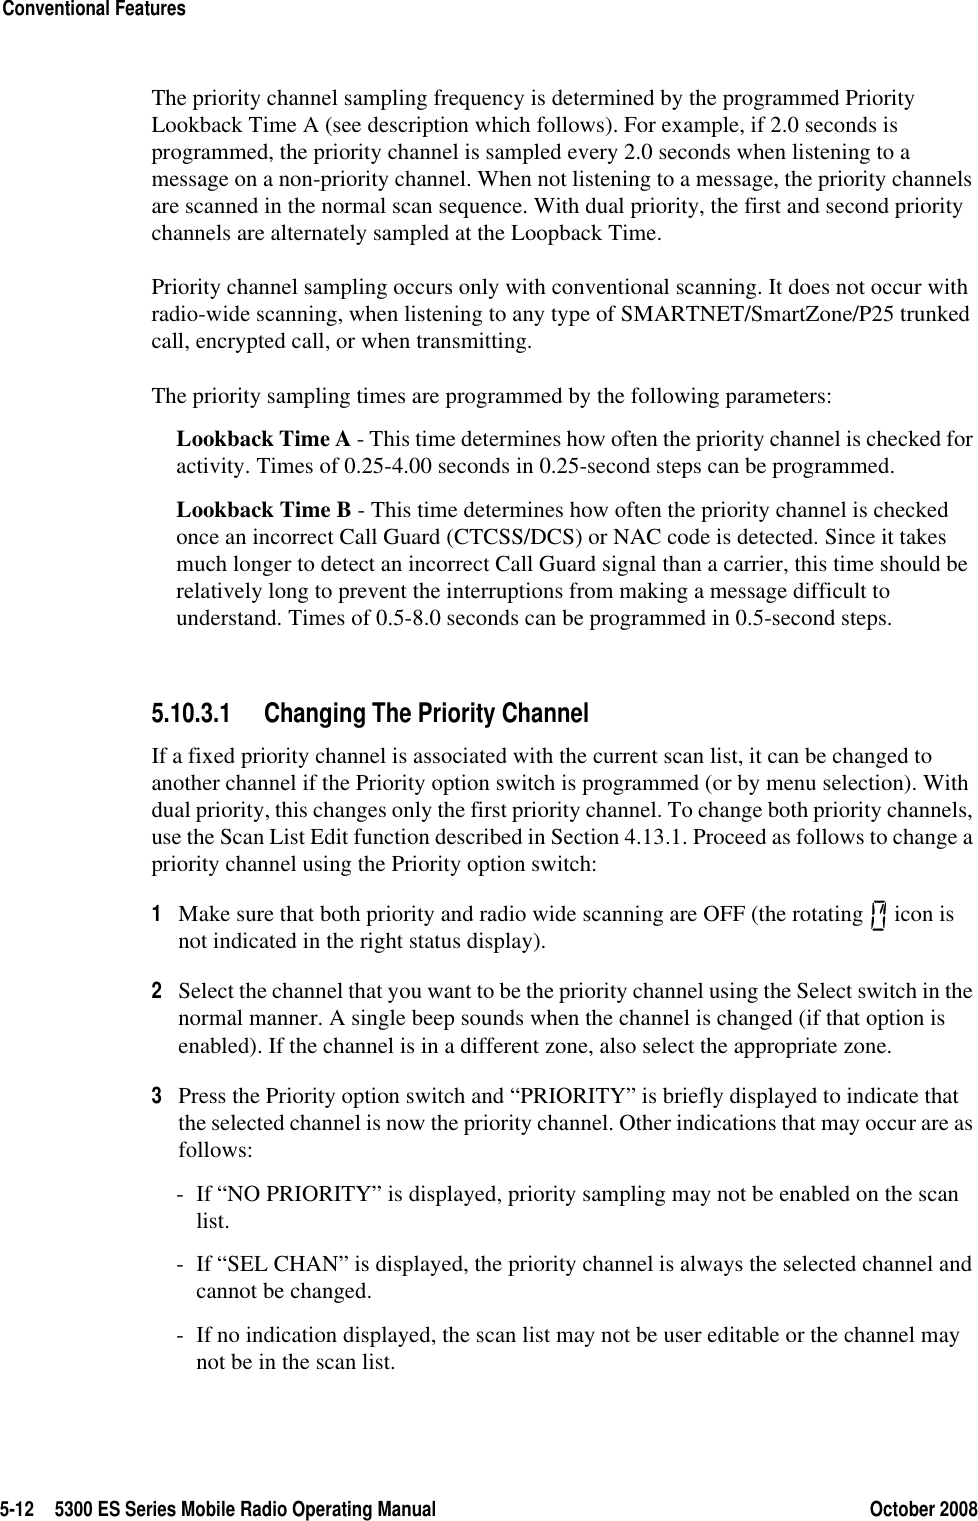 5-12 5300 ES Series Mobile Radio Operating Manual October 2008Conventional FeaturesThe priority channel sampling frequency is determined by the programmed Priority Lookback Time A (see description which follows). For example, if 2.0 seconds is programmed, the priority channel is sampled every 2.0 seconds when listening to a message on a non-priority channel. When not listening to a message, the priority channels are scanned in the normal scan sequence. With dual priority, the first and second priority channels are alternately sampled at the Loopback Time.Priority channel sampling occurs only with conventional scanning. It does not occur with radio-wide scanning, when listening to any type of SMARTNET/SmartZone/P25 trunked call, encrypted call, or when transmitting.The priority sampling times are programmed by the following parameters:Lookback Time A - This time determines how often the priority channel is checked for activity. Times of 0.25-4.00 seconds in 0.25-second steps can be programmed.Lookback Time B - This time determines how often the priority channel is checked once an incorrect Call Guard (CTCSS/DCS) or NAC code is detected. Since it takes much longer to detect an incorrect Call Guard signal than a carrier, this time should be relatively long to prevent the interruptions from making a message difficult to understand. Times of 0.5-8.0 seconds can be programmed in 0.5-second steps.5.10.3.1 Changing The Priority ChannelIf a fixed priority channel is associated with the current scan list, it can be changed to another channel if the Priority option switch is programmed (or by menu selection). With dual priority, this changes only the first priority channel. To change both priority channels, use the Scan List Edit function described in Section 4.13.1. Proceed as follows to change a priority channel using the Priority option switch:1Make sure that both priority and radio wide scanning are OFF (the rotating   icon is not indicated in the right status display).2Select the channel that you want to be the priority channel using the Select switch in the normal manner. A single beep sounds when the channel is changed (if that option is enabled). If the channel is in a different zone, also select the appropriate zone.3Press the Priority option switch and “PRIORITY” is briefly displayed to indicate that the selected channel is now the priority channel. Other indications that may occur are as follows:- If “NO PRIORITY” is displayed, priority sampling may not be enabled on the scan list.- If “SEL CHAN” is displayed, the priority channel is always the selected channel and cannot be changed.- If no indication displayed, the scan list may not be user editable or the channel may not be in the scan list.